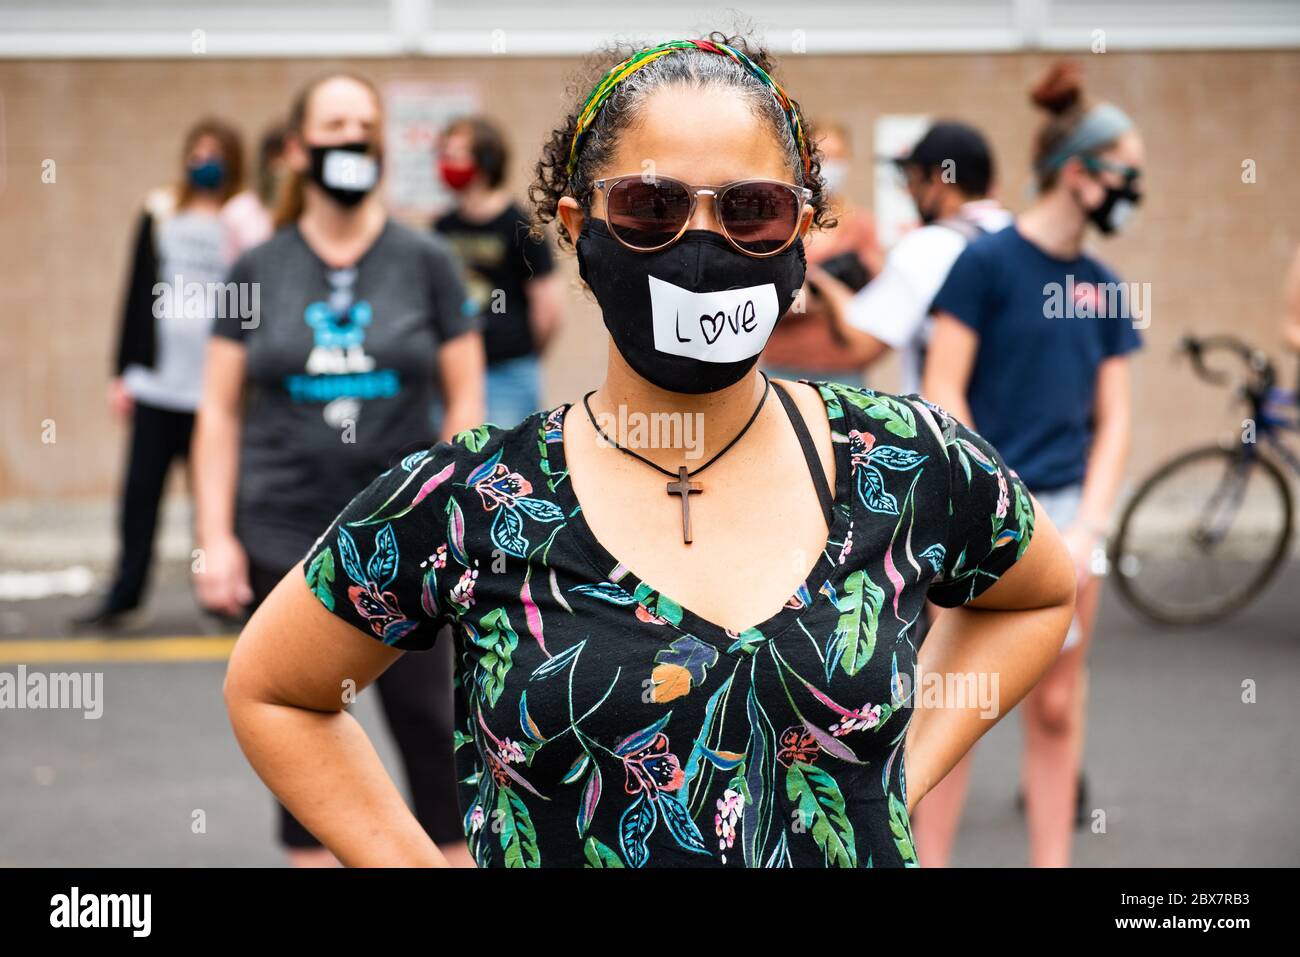 Philadelphia, PA / USA. About two dozen people gathered at the corner of Kensington and Allegheny Avenues for a prayer vigil for the city. Wearing masks and observing social distancing, participants taped faith-inspired words over their mouths. June 04 2020. Credit: Christopher Evens / Alamy Live News Stock Photo